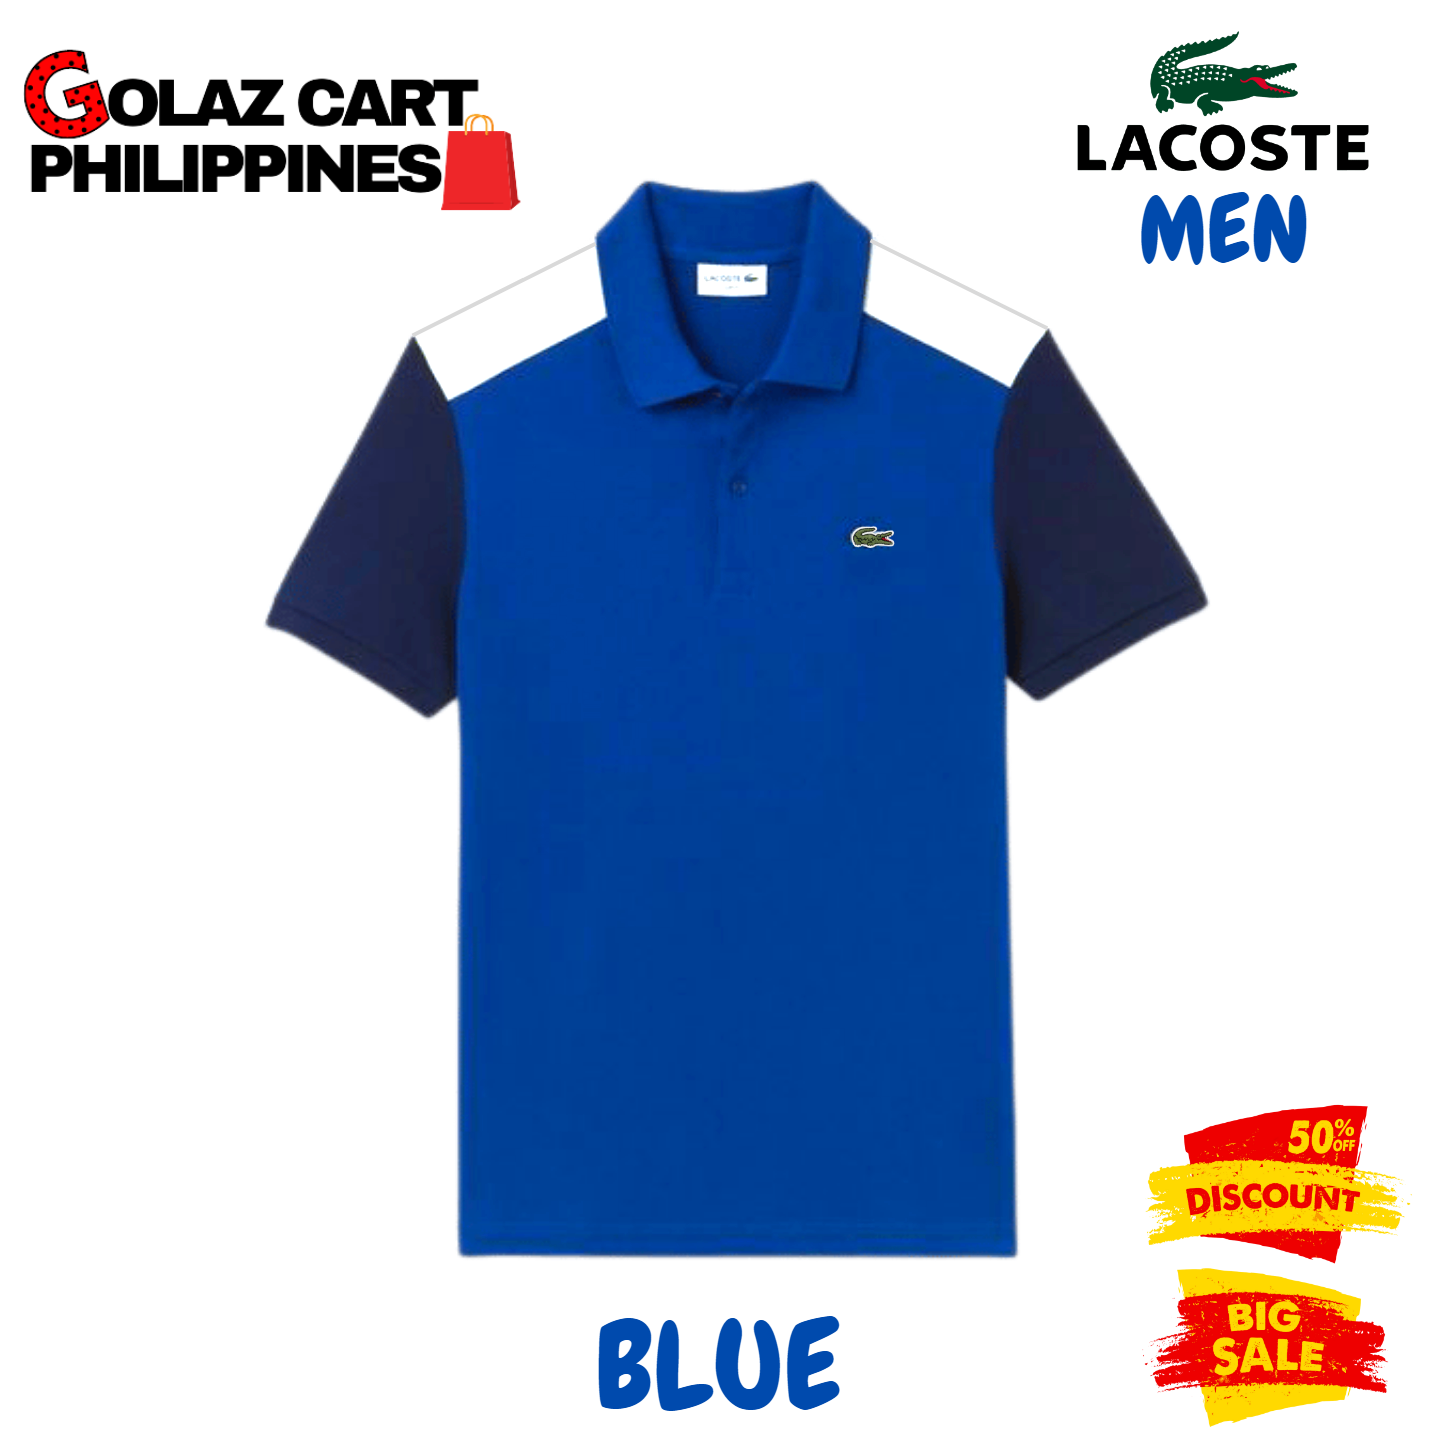 LACOSTE POLO SHIRT FOR MEN INFINITY EDITION | Lazada PH